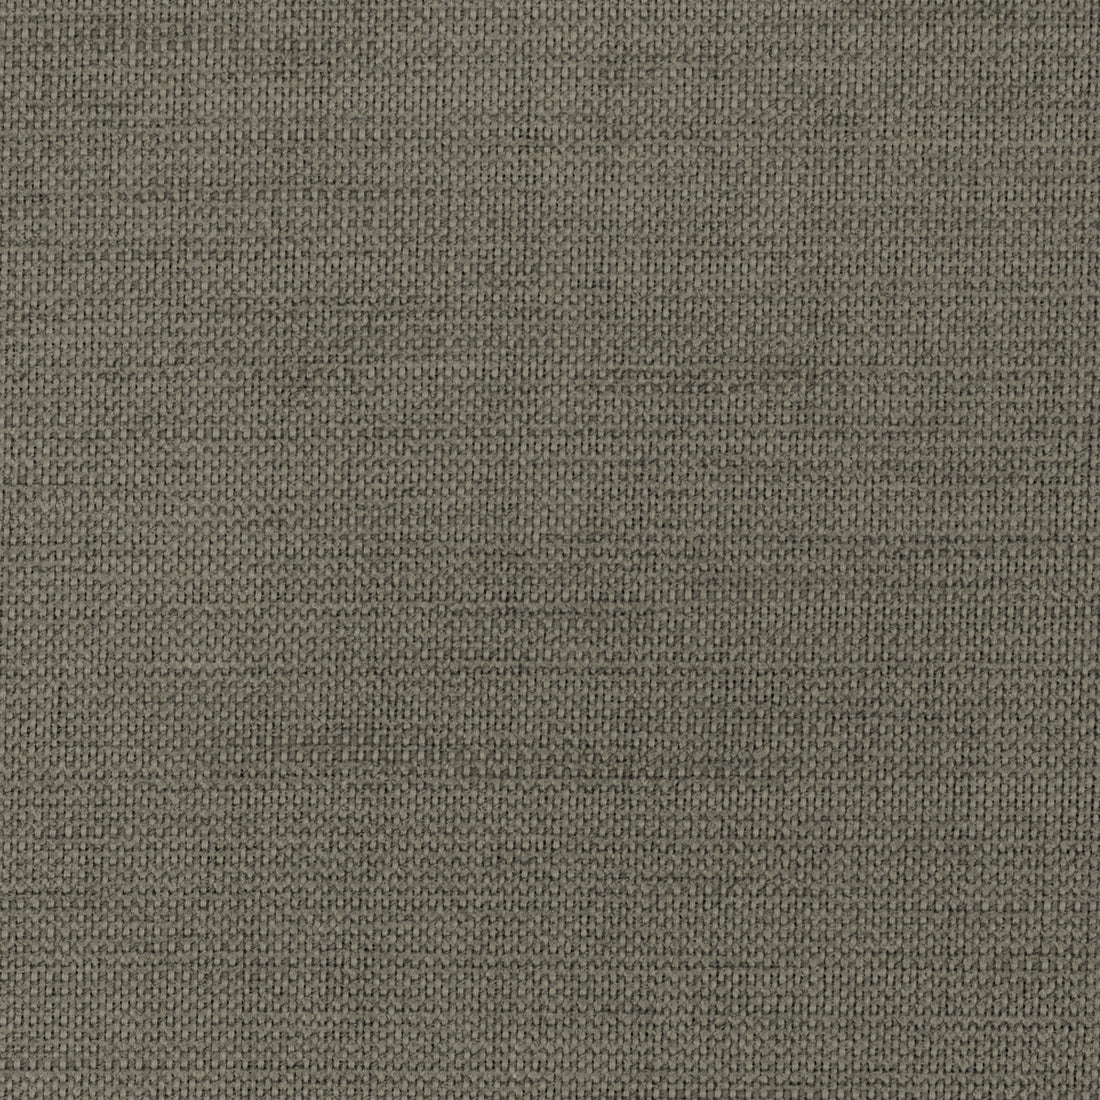 Kravet Smart fabric in 36302-21 color - pattern 36302.21.0 - by Kravet Smart in the Performance Crypton Home collection